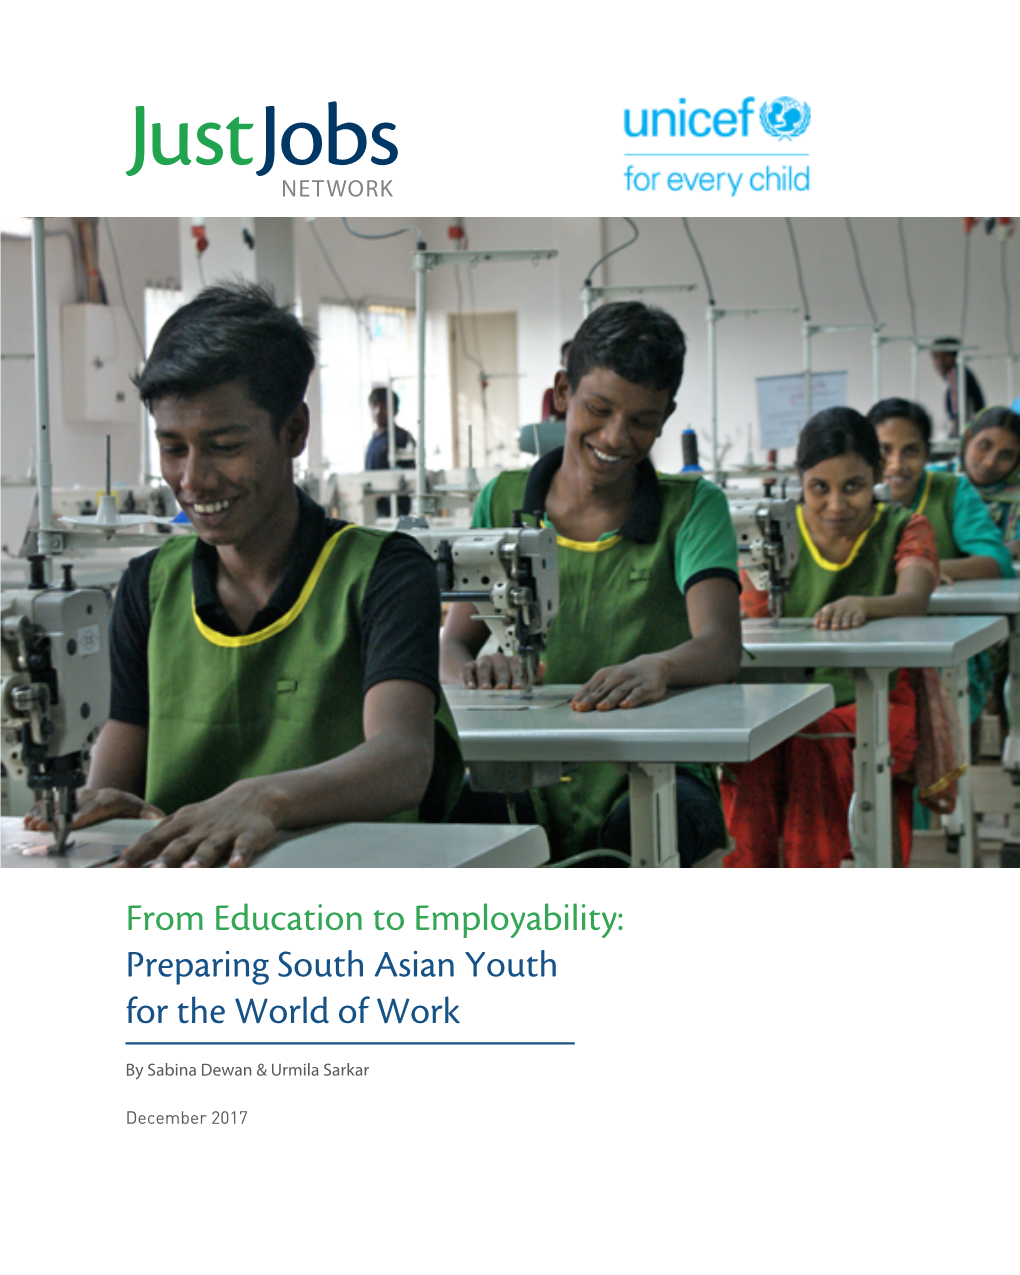 From Education to Employability: Preparing South Asian Youth for the World of Work